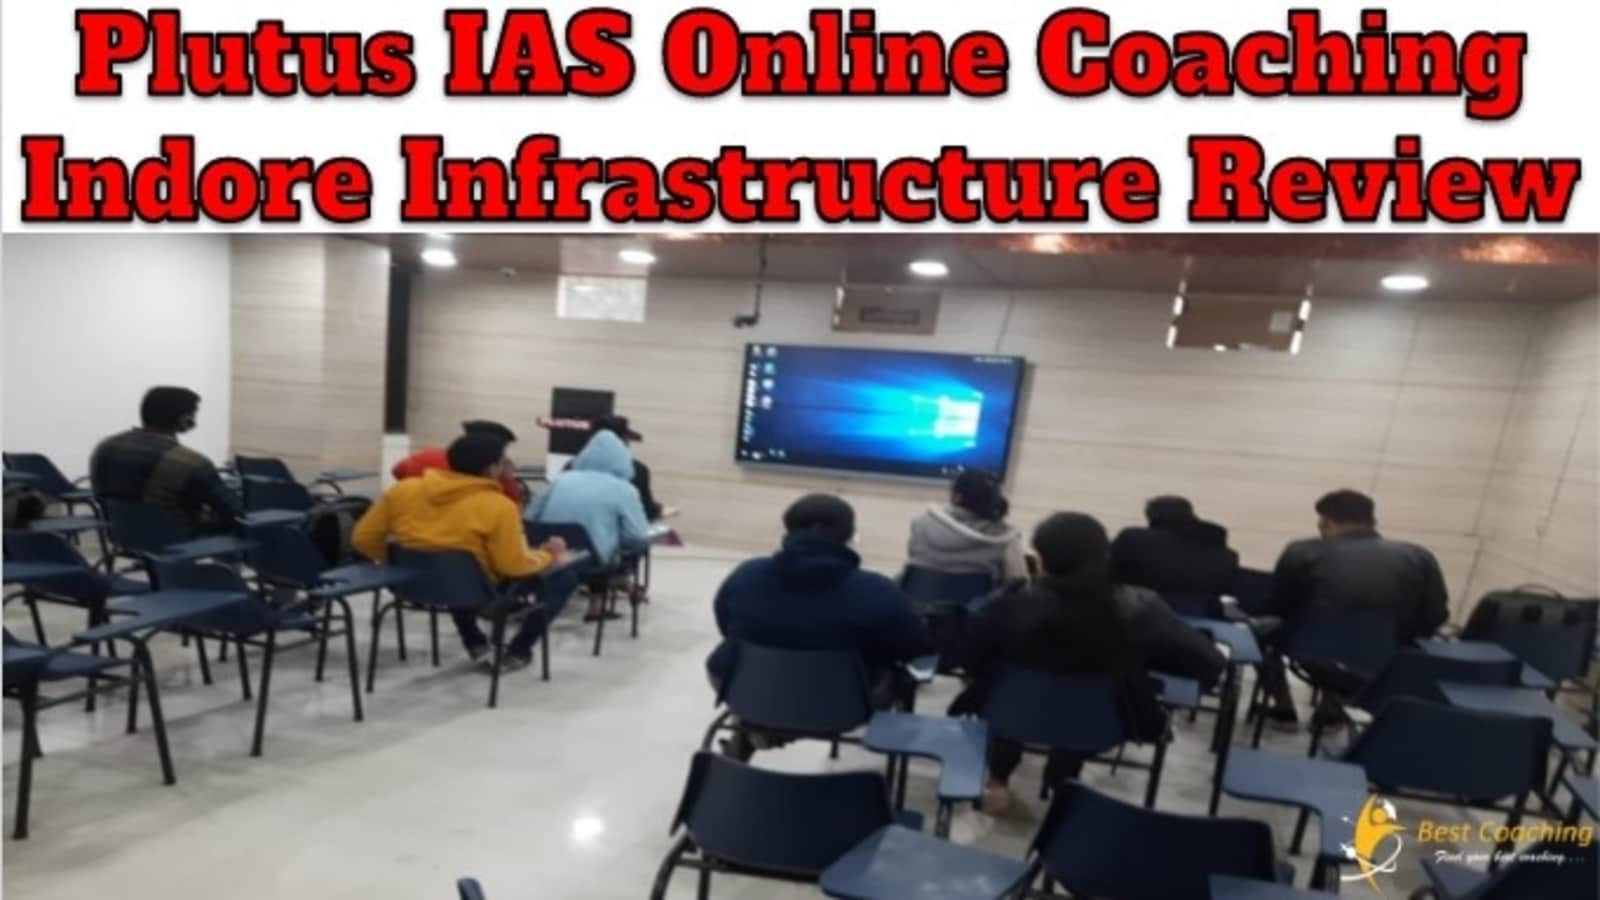 Plutus IAS Online Coaching Indore Infrastructure Review